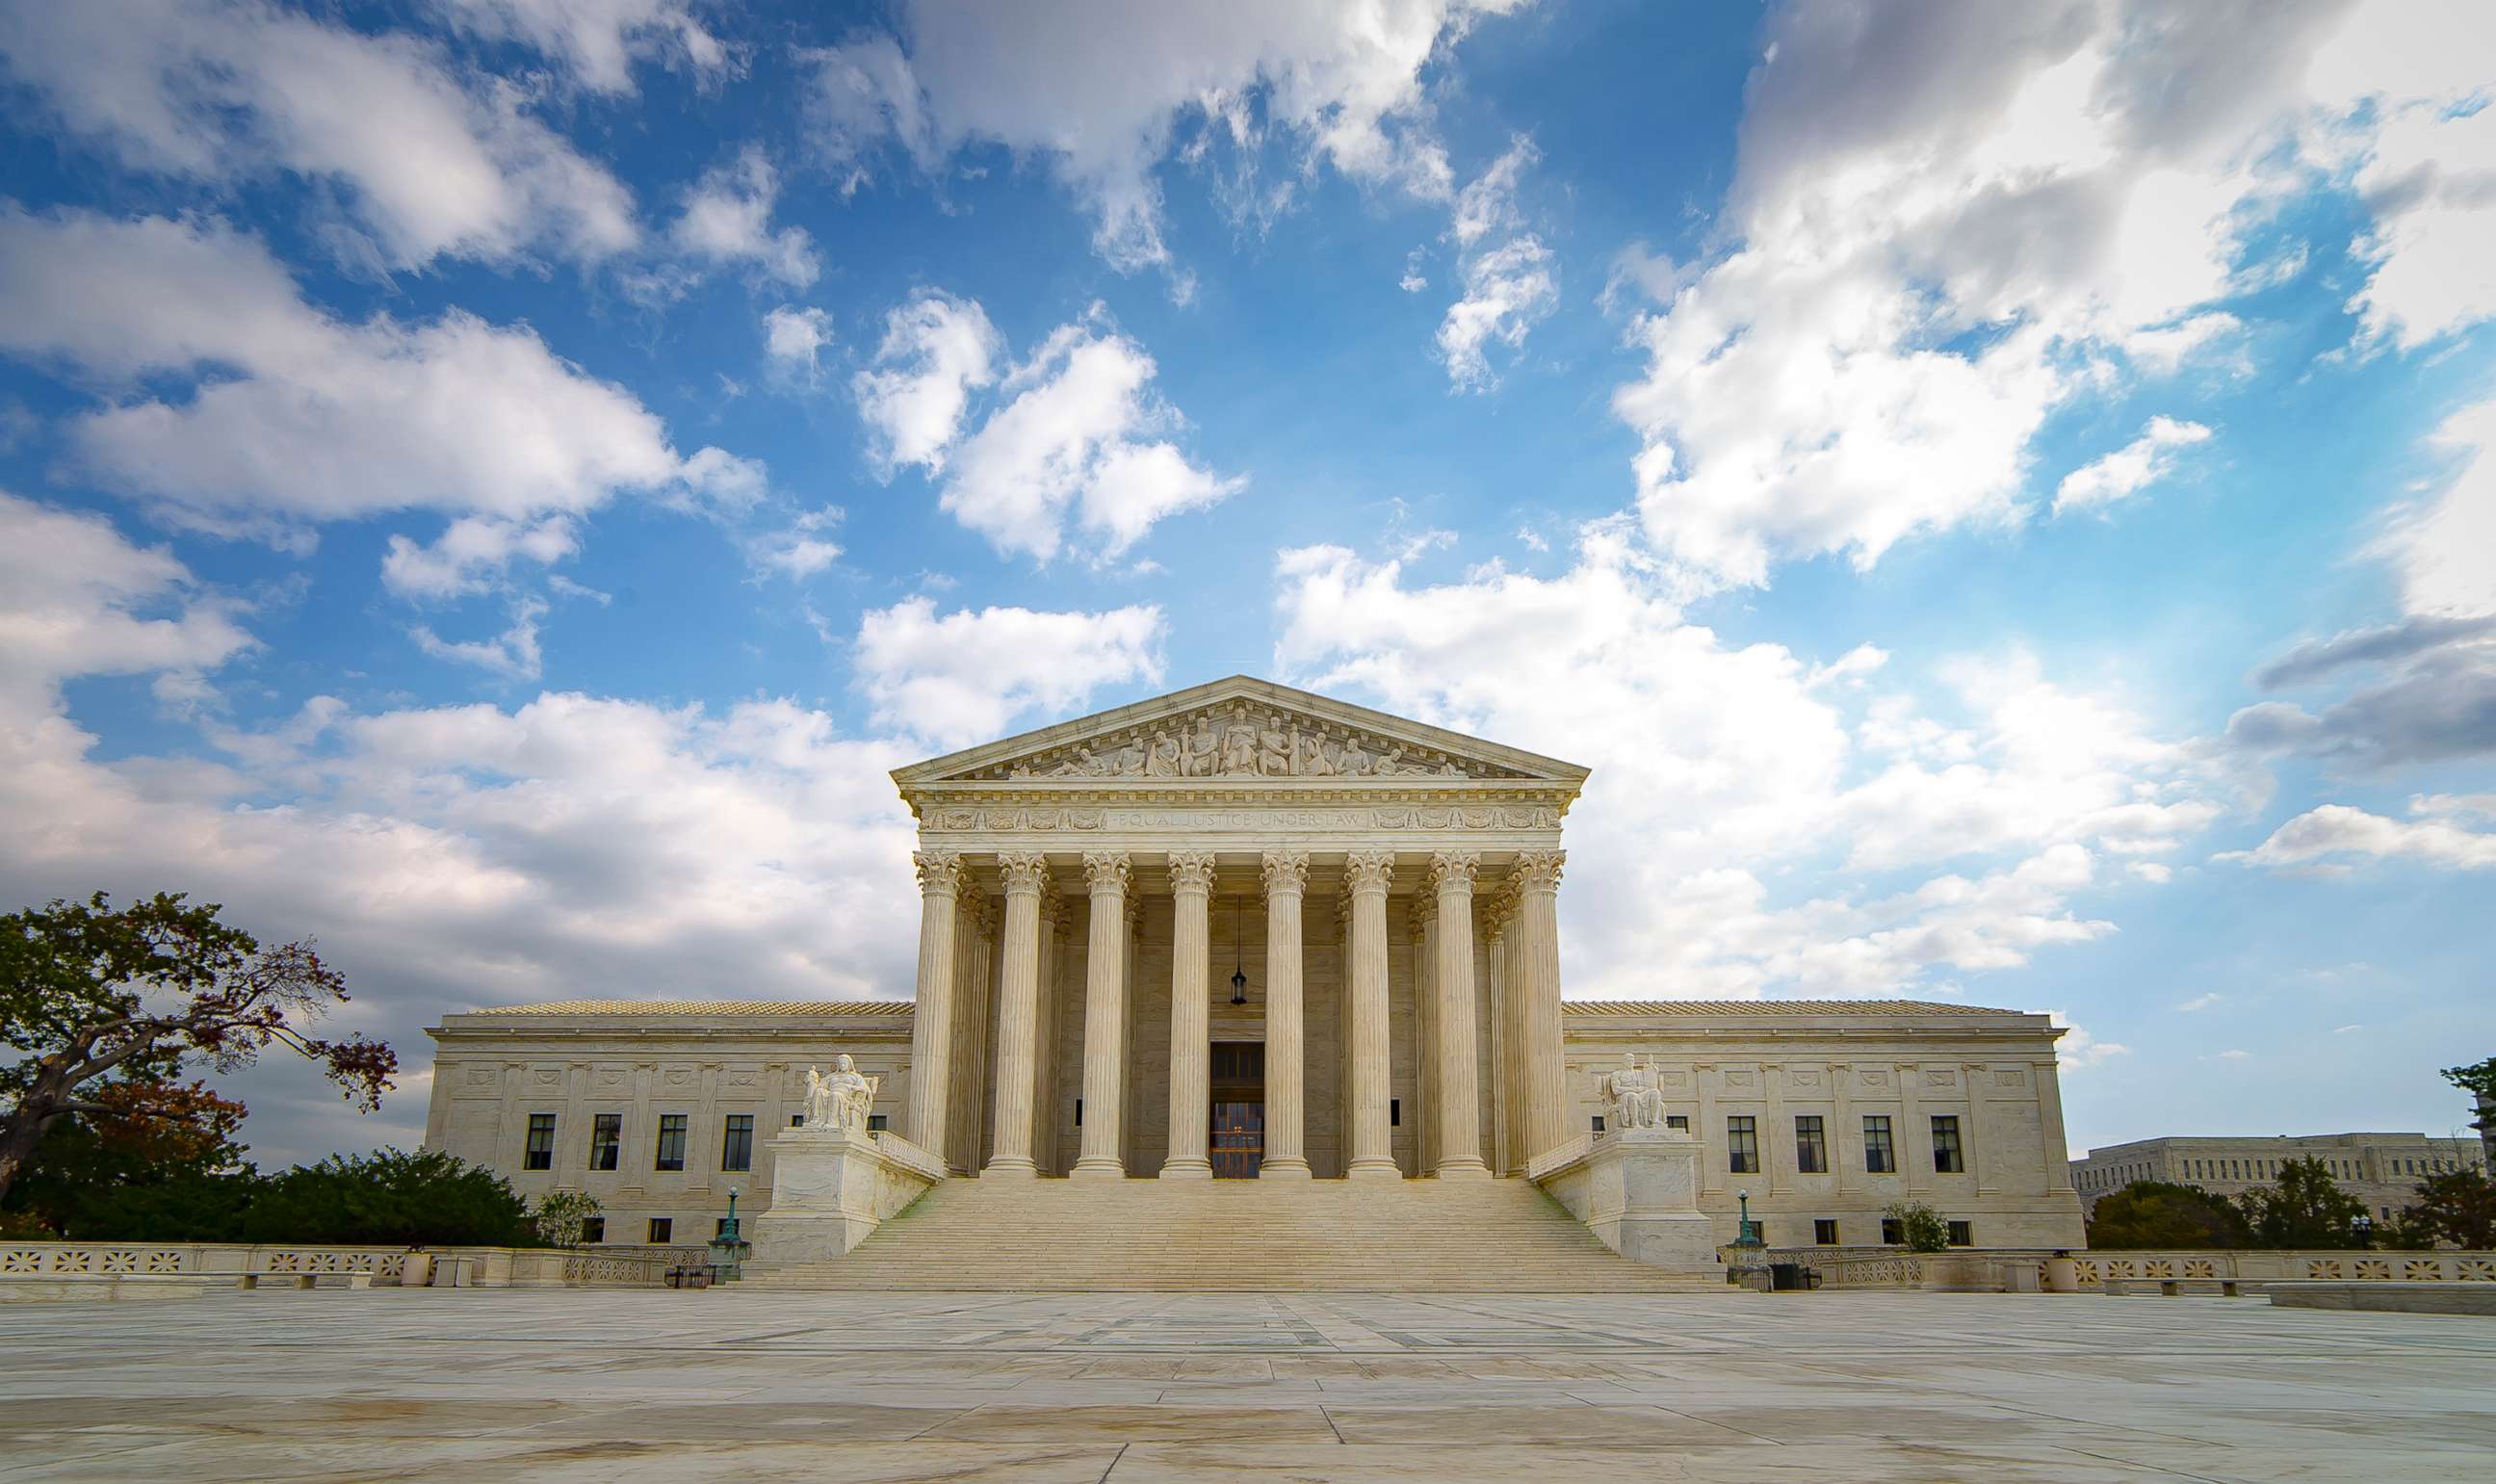 PHOTO: The United States Supreme Court Building in Washington D.C. is pictured in this undated stock photo.